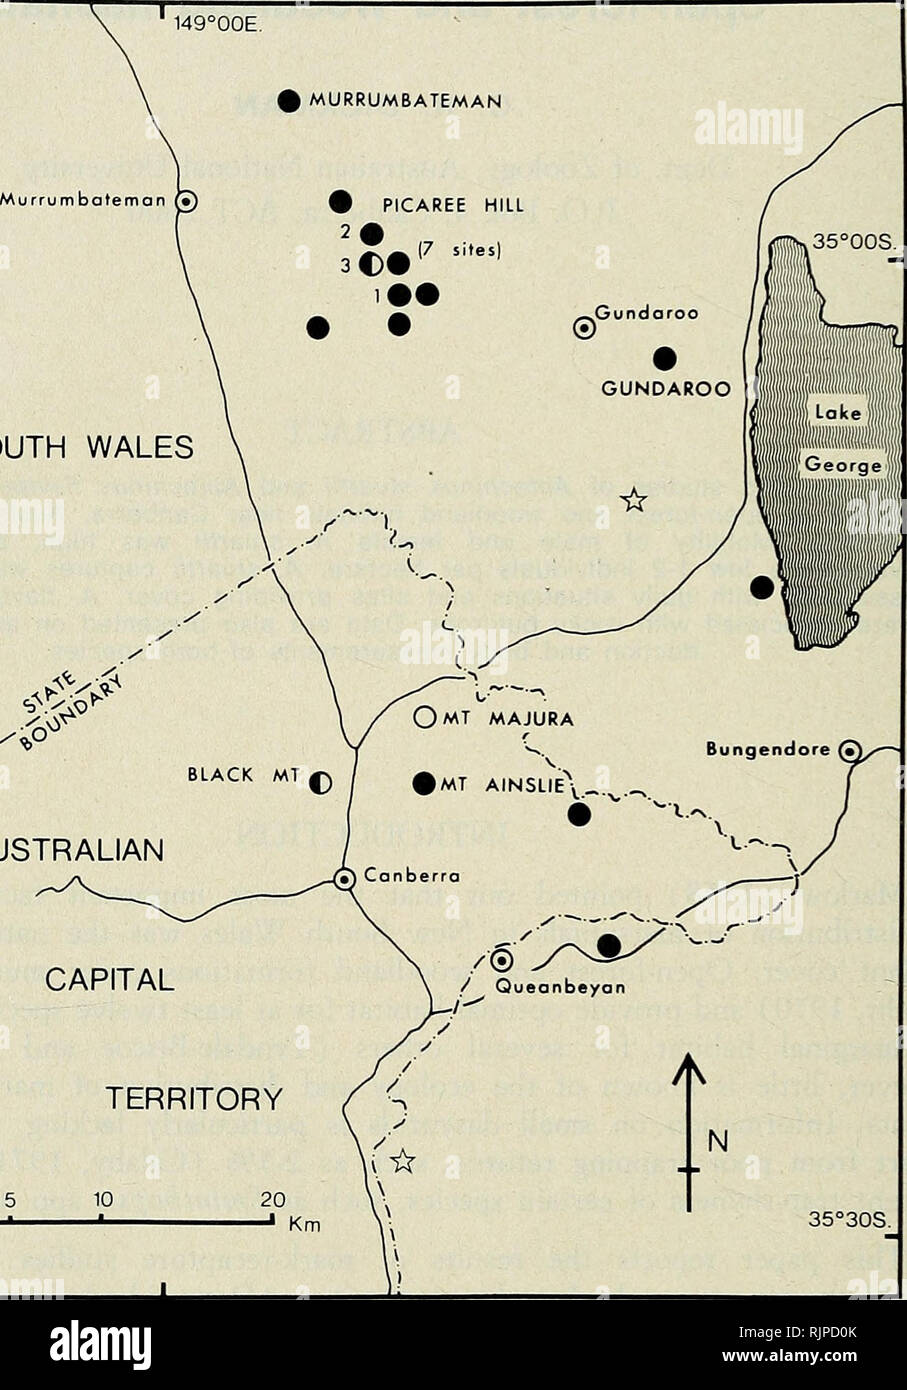 . The Australian zoologist. Zoology; Zoology; Zoology. C. R. DICKMAN MATERIALS AND METHODS Study areas Nineteen different localities within a 45 km radius of Canberra were sampled. These are shown in Fig. 1. 149°00E NEW SOUTH WALES. AUSTRALIAN CONDOR CREEK CAPITAL 35°30S. FIG. 1. Map showing the distribution of localities trapped for Antechinus. Solid circles, A. stuartii captured; open circle, A. flavipes; half-open circle, both species; stars, trapping unsuccessful. Localities mentioned in the text are shown in capital type. 434 Aust. Zool. 20(3), 1980. Please note that these images are extr Stock Photo